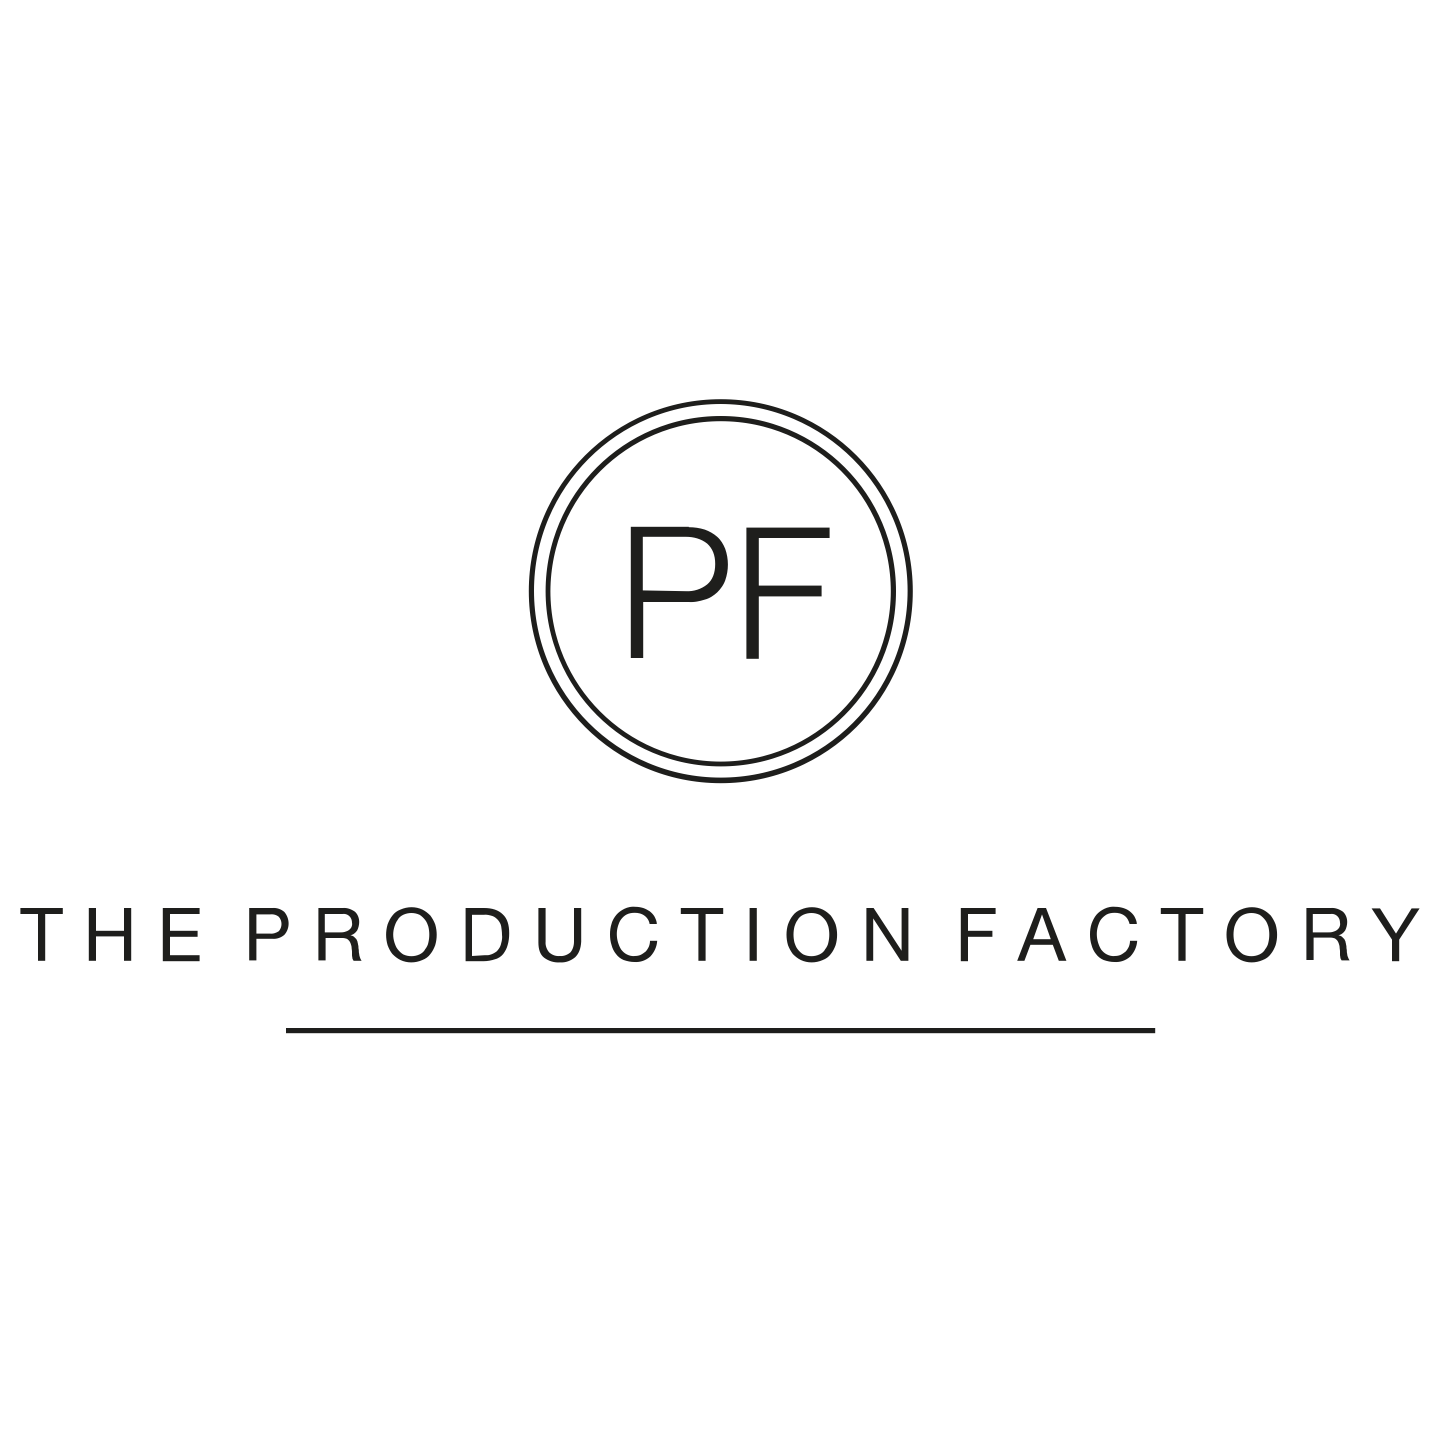 The Production Factory